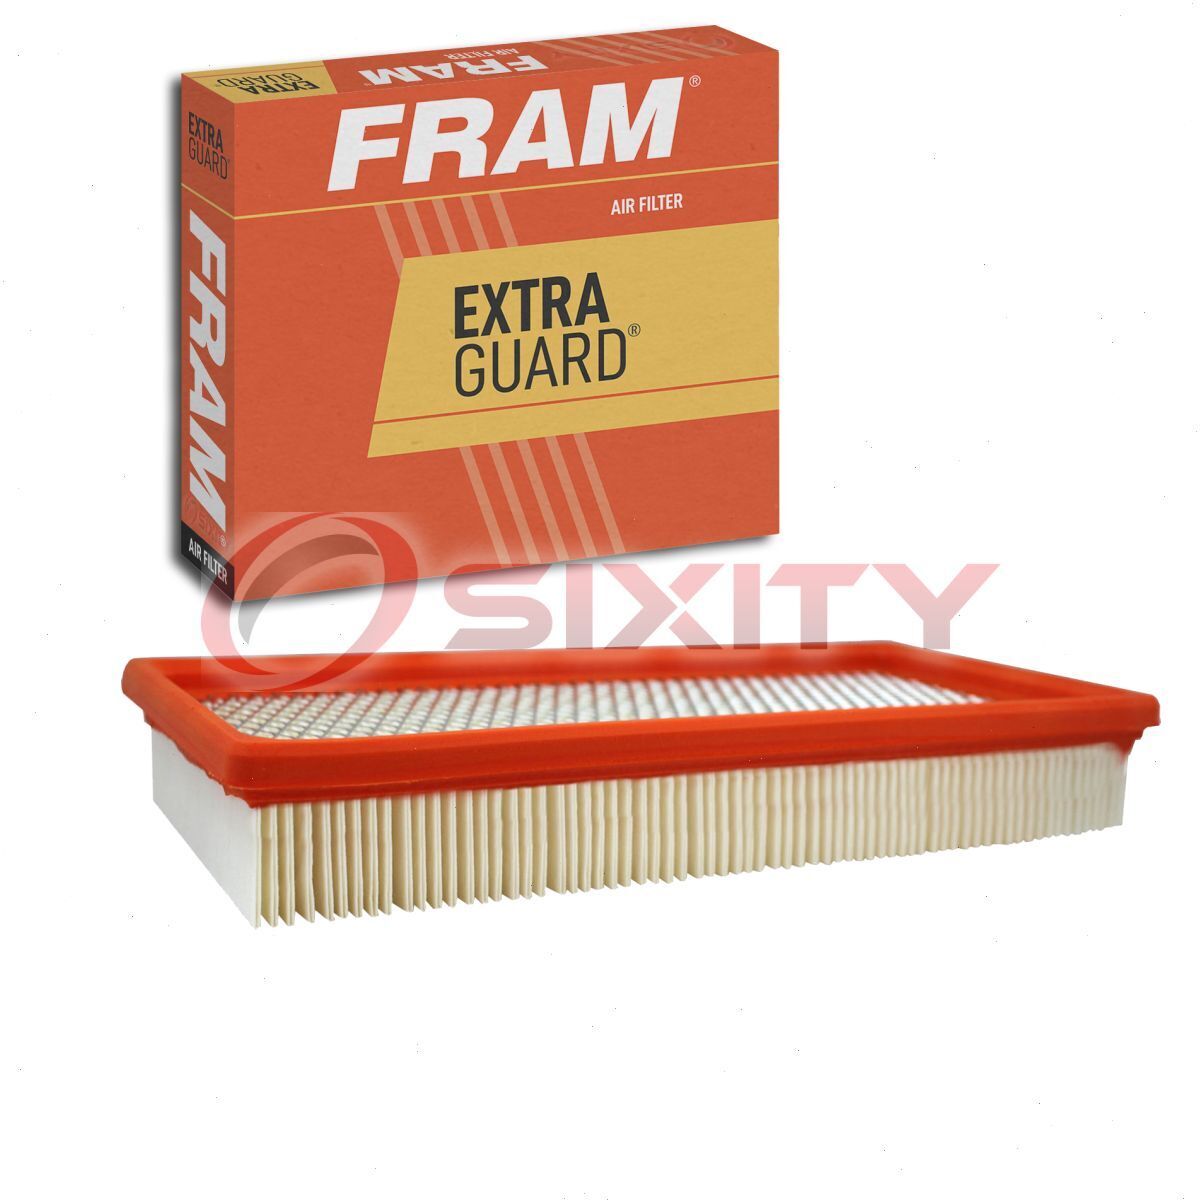 FRAM Extra Guard Air Filter for 1977-1989 Volkswagen Scirocco Intake Inlet nv